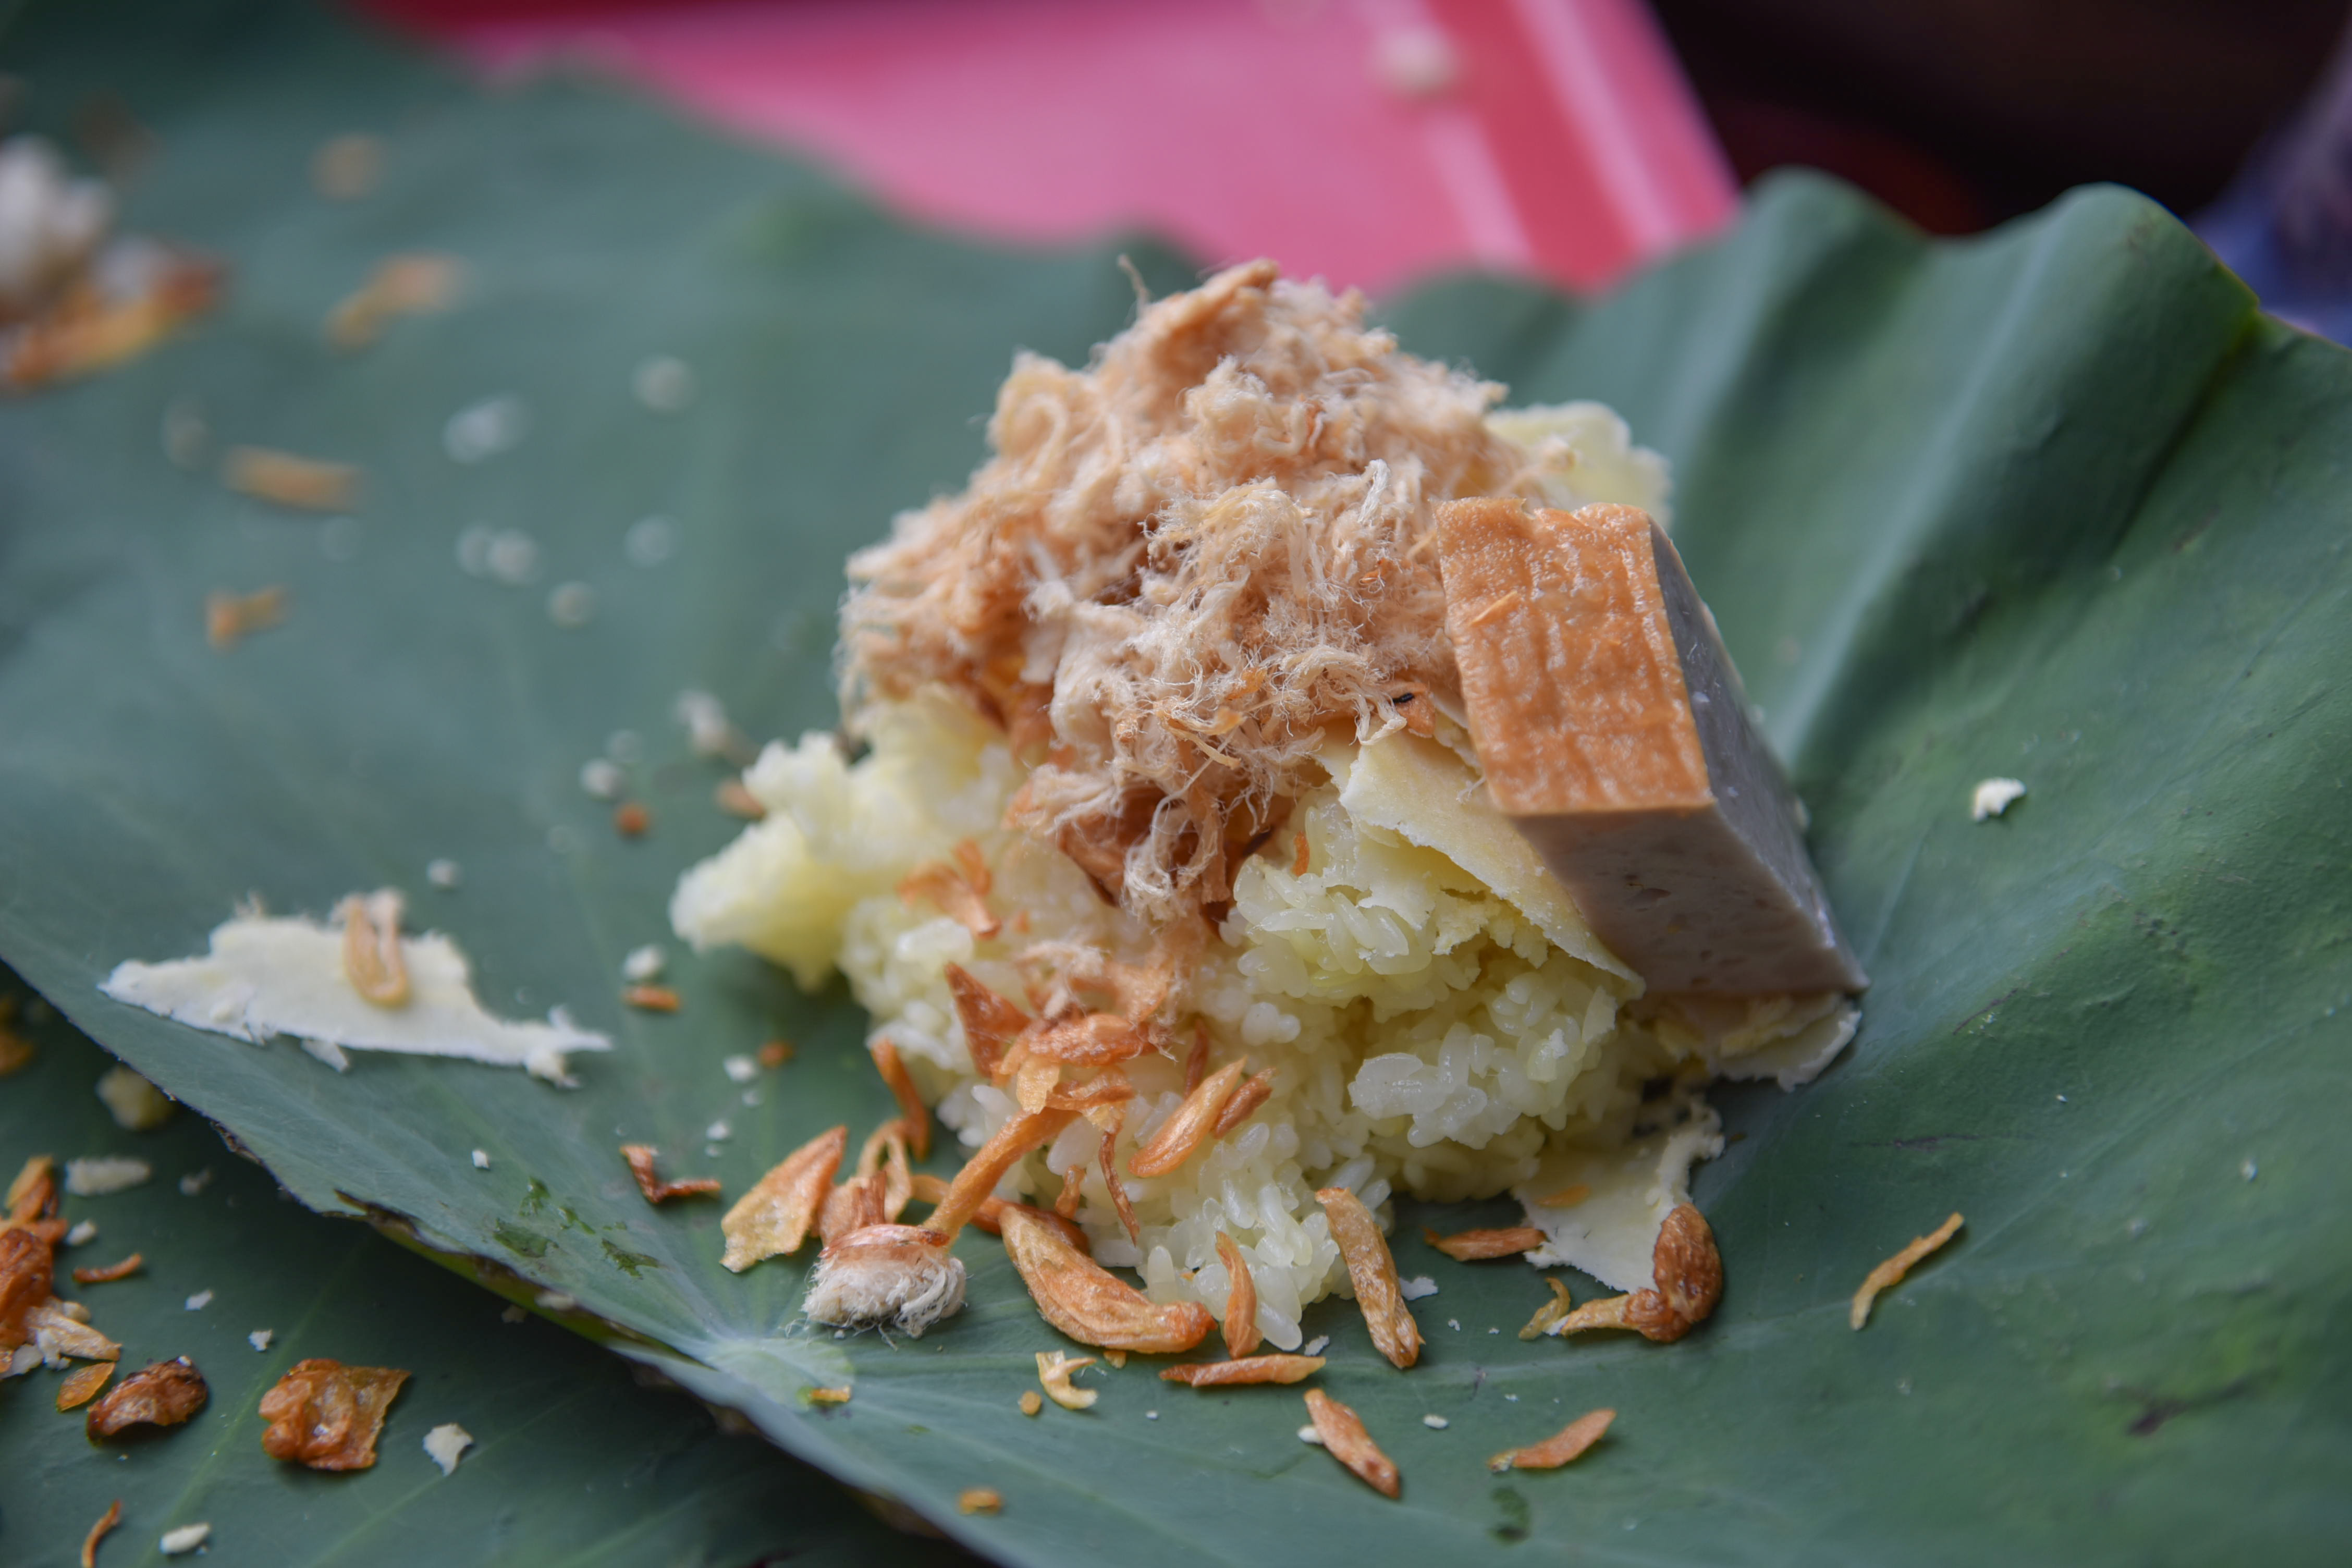 A portion of sticky rice topped with pork floss and bologna at Hanh’s stall at 35 Ngo Thi Thu Minh, Ward 2, Tan Binh District, Ho Chi Minh City. Photo: Ngoc Phuong / Tuoi Tre News